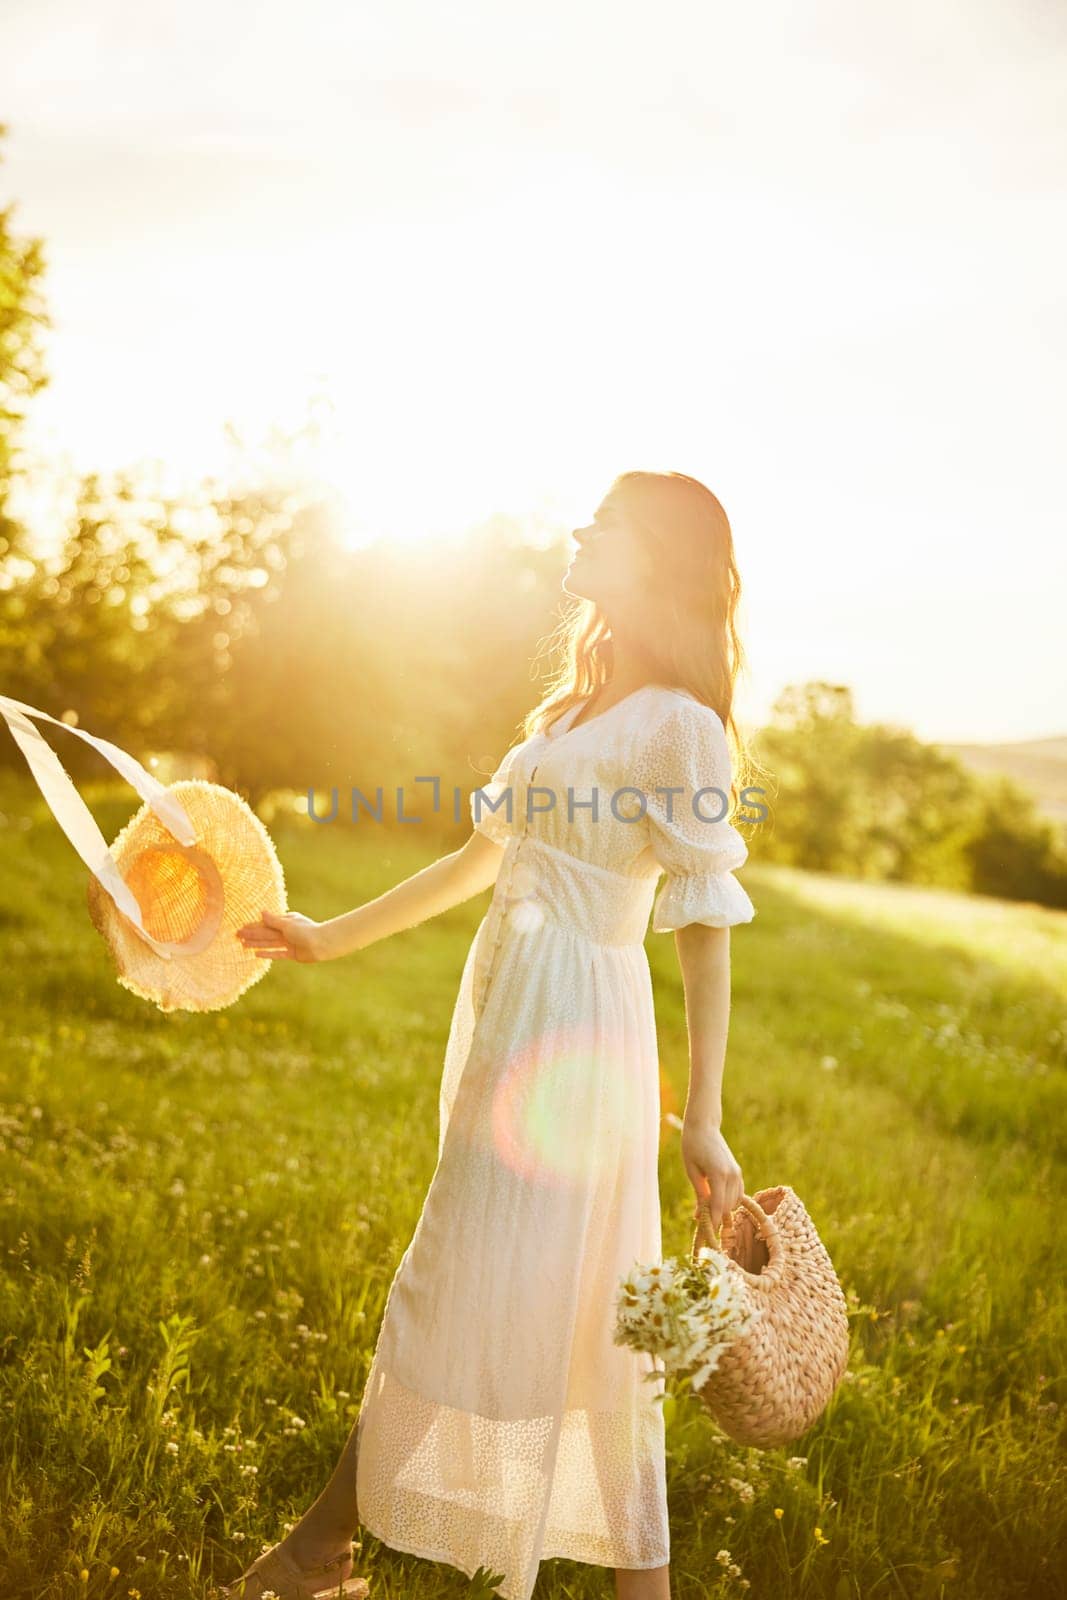 a beautiful woman in a hat and a light dress walks through a chamomile field with a basket full of daisies in the rays of the setting sun by Vichizh